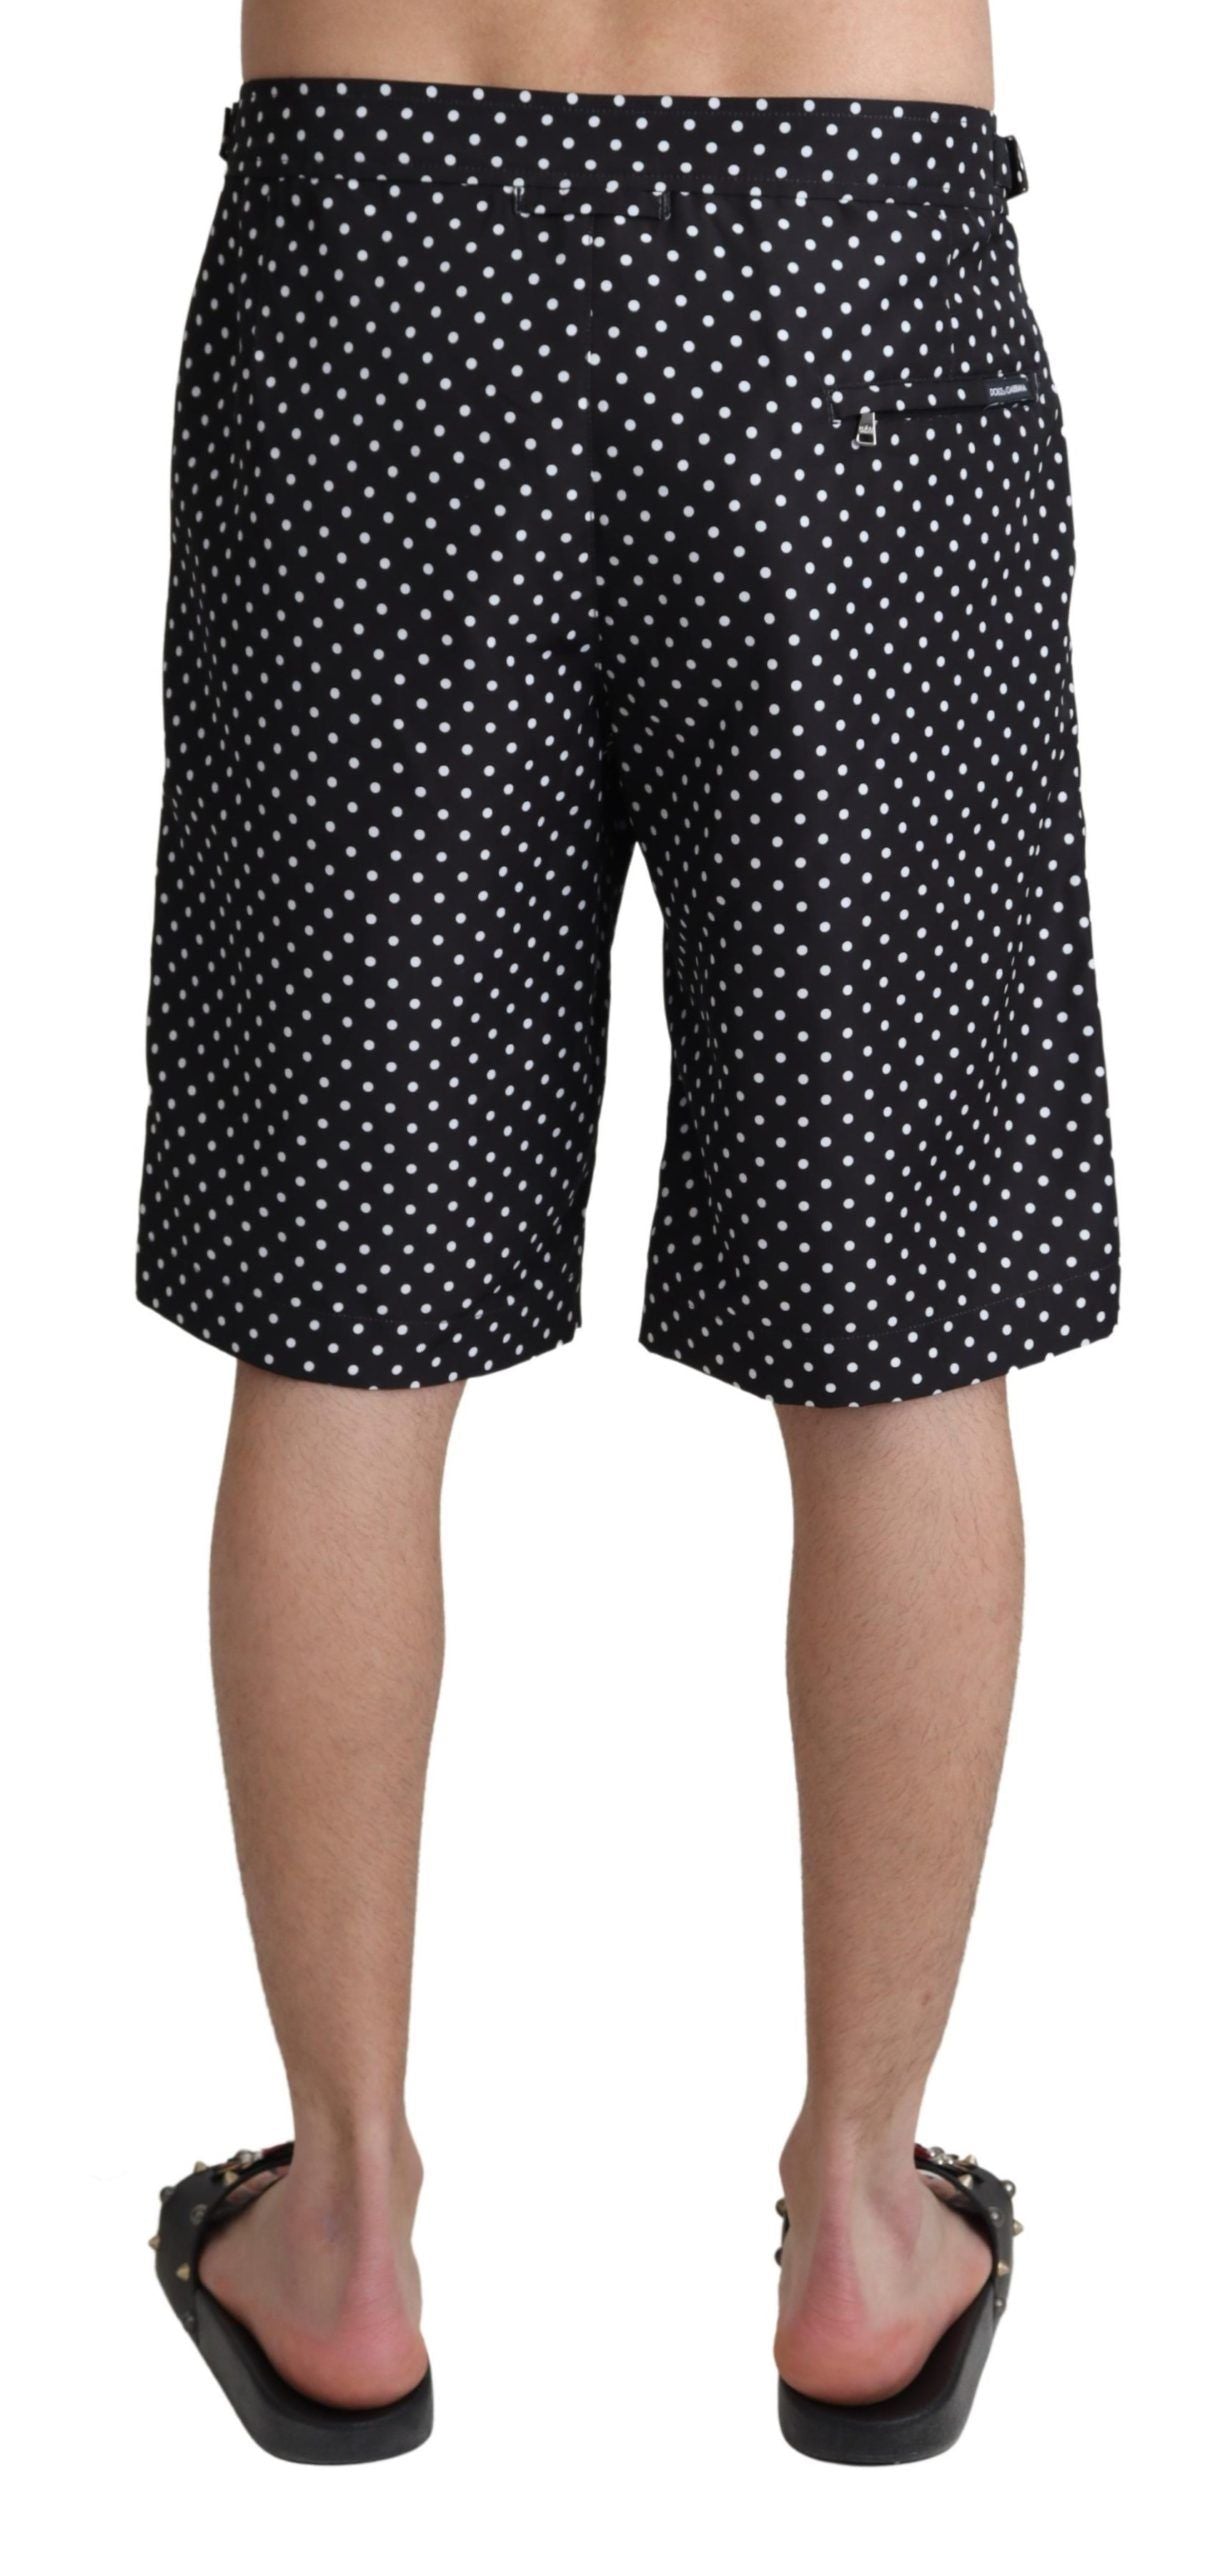 Black Polka Dots Beachwear Shorts Swimwear - Designed by Dolce & Gabbana Available to Buy at a Discounted Price on Moon Behind The Hill Online Designer Discount Store